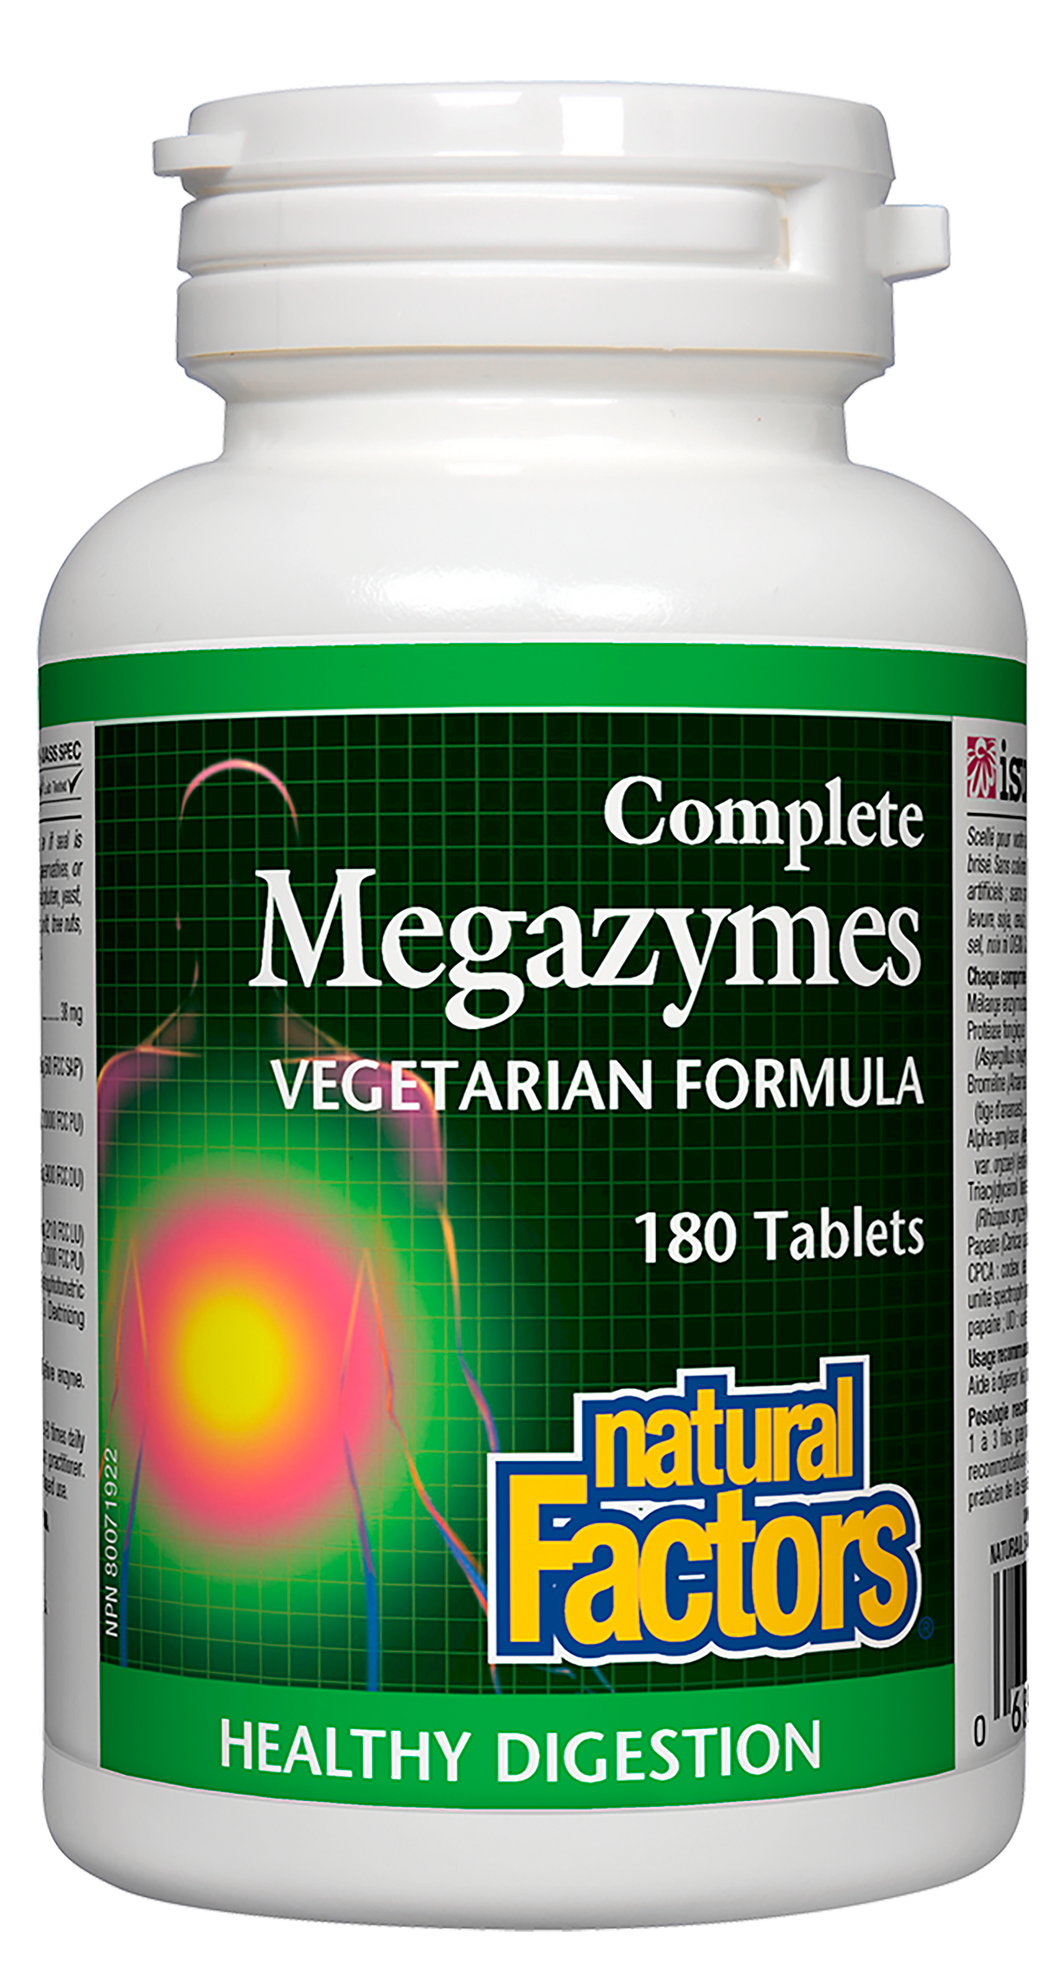 Natural Factors Complete Megazymes is a comprehensive digestive enzyme formula designed to assist and enhance healthy digestion. This vegetarian-friendly, non-GMO formula features natural proteases, amylase, lipase, bromelain, and papain to help the body break down proteins, carbohydrates, and fats, to support healthy digestion and improve nutrient absorption. 